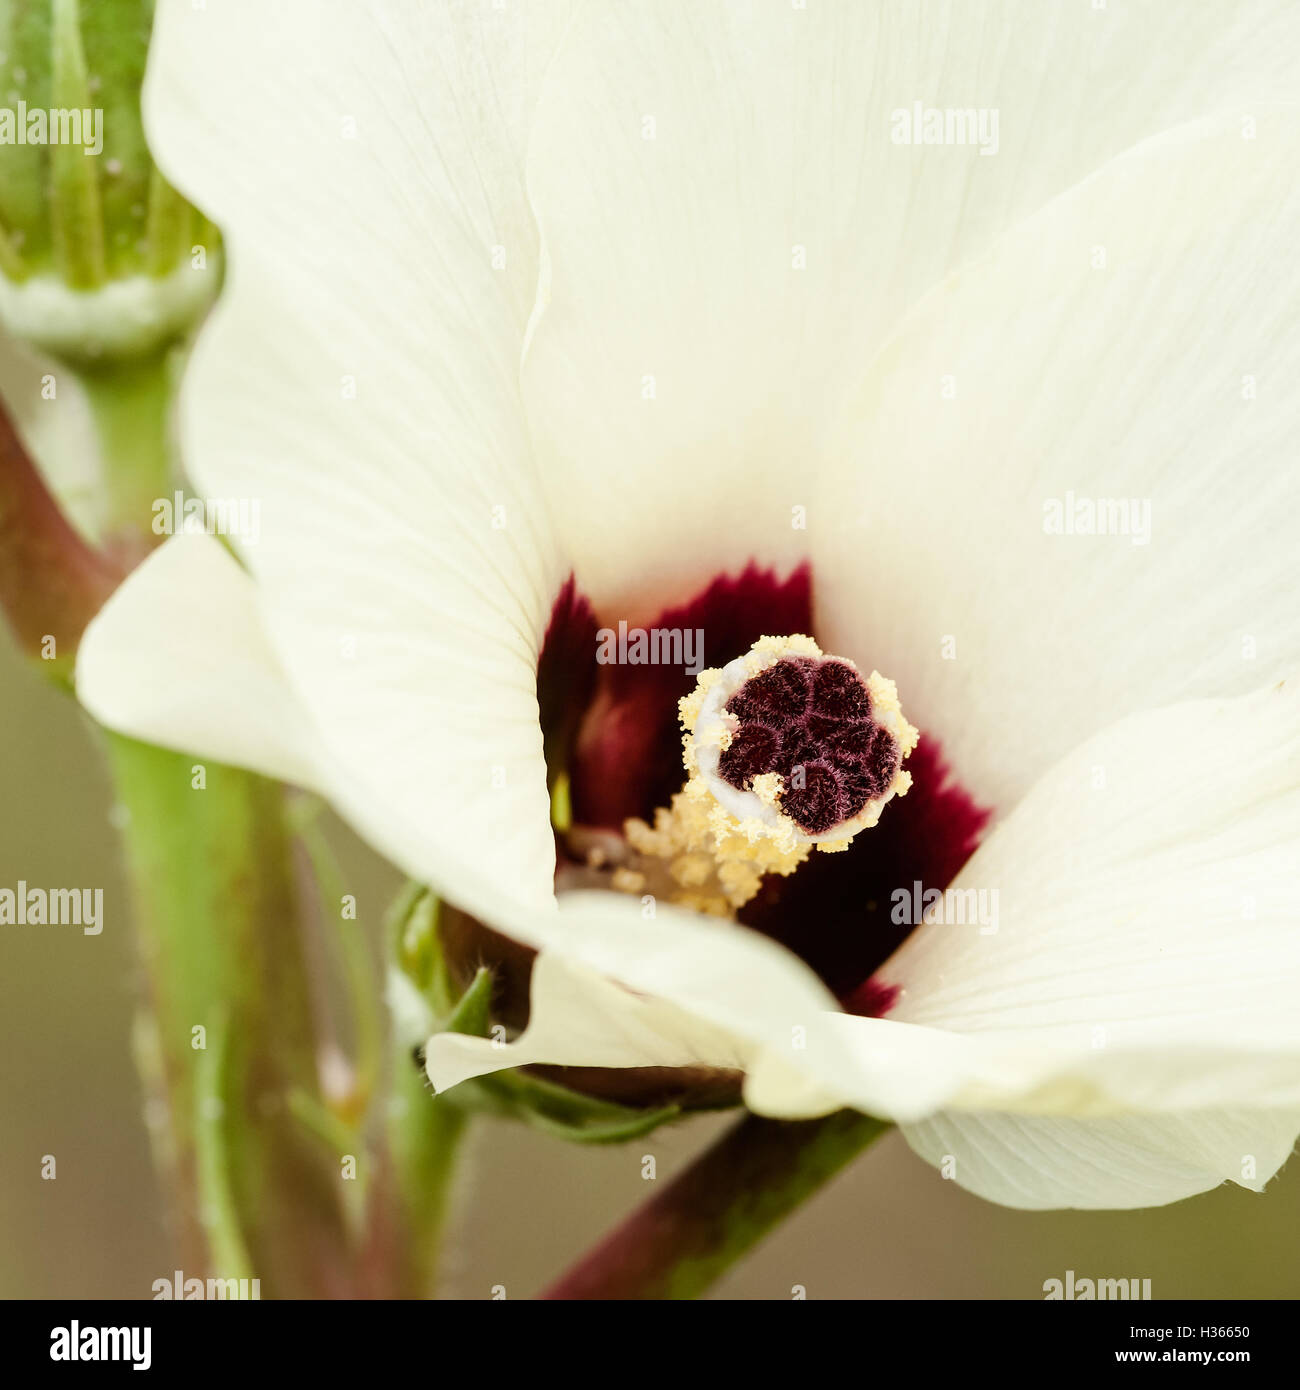 Okra flower and fruit vegetable organic agriculture gardening square Stock Photo